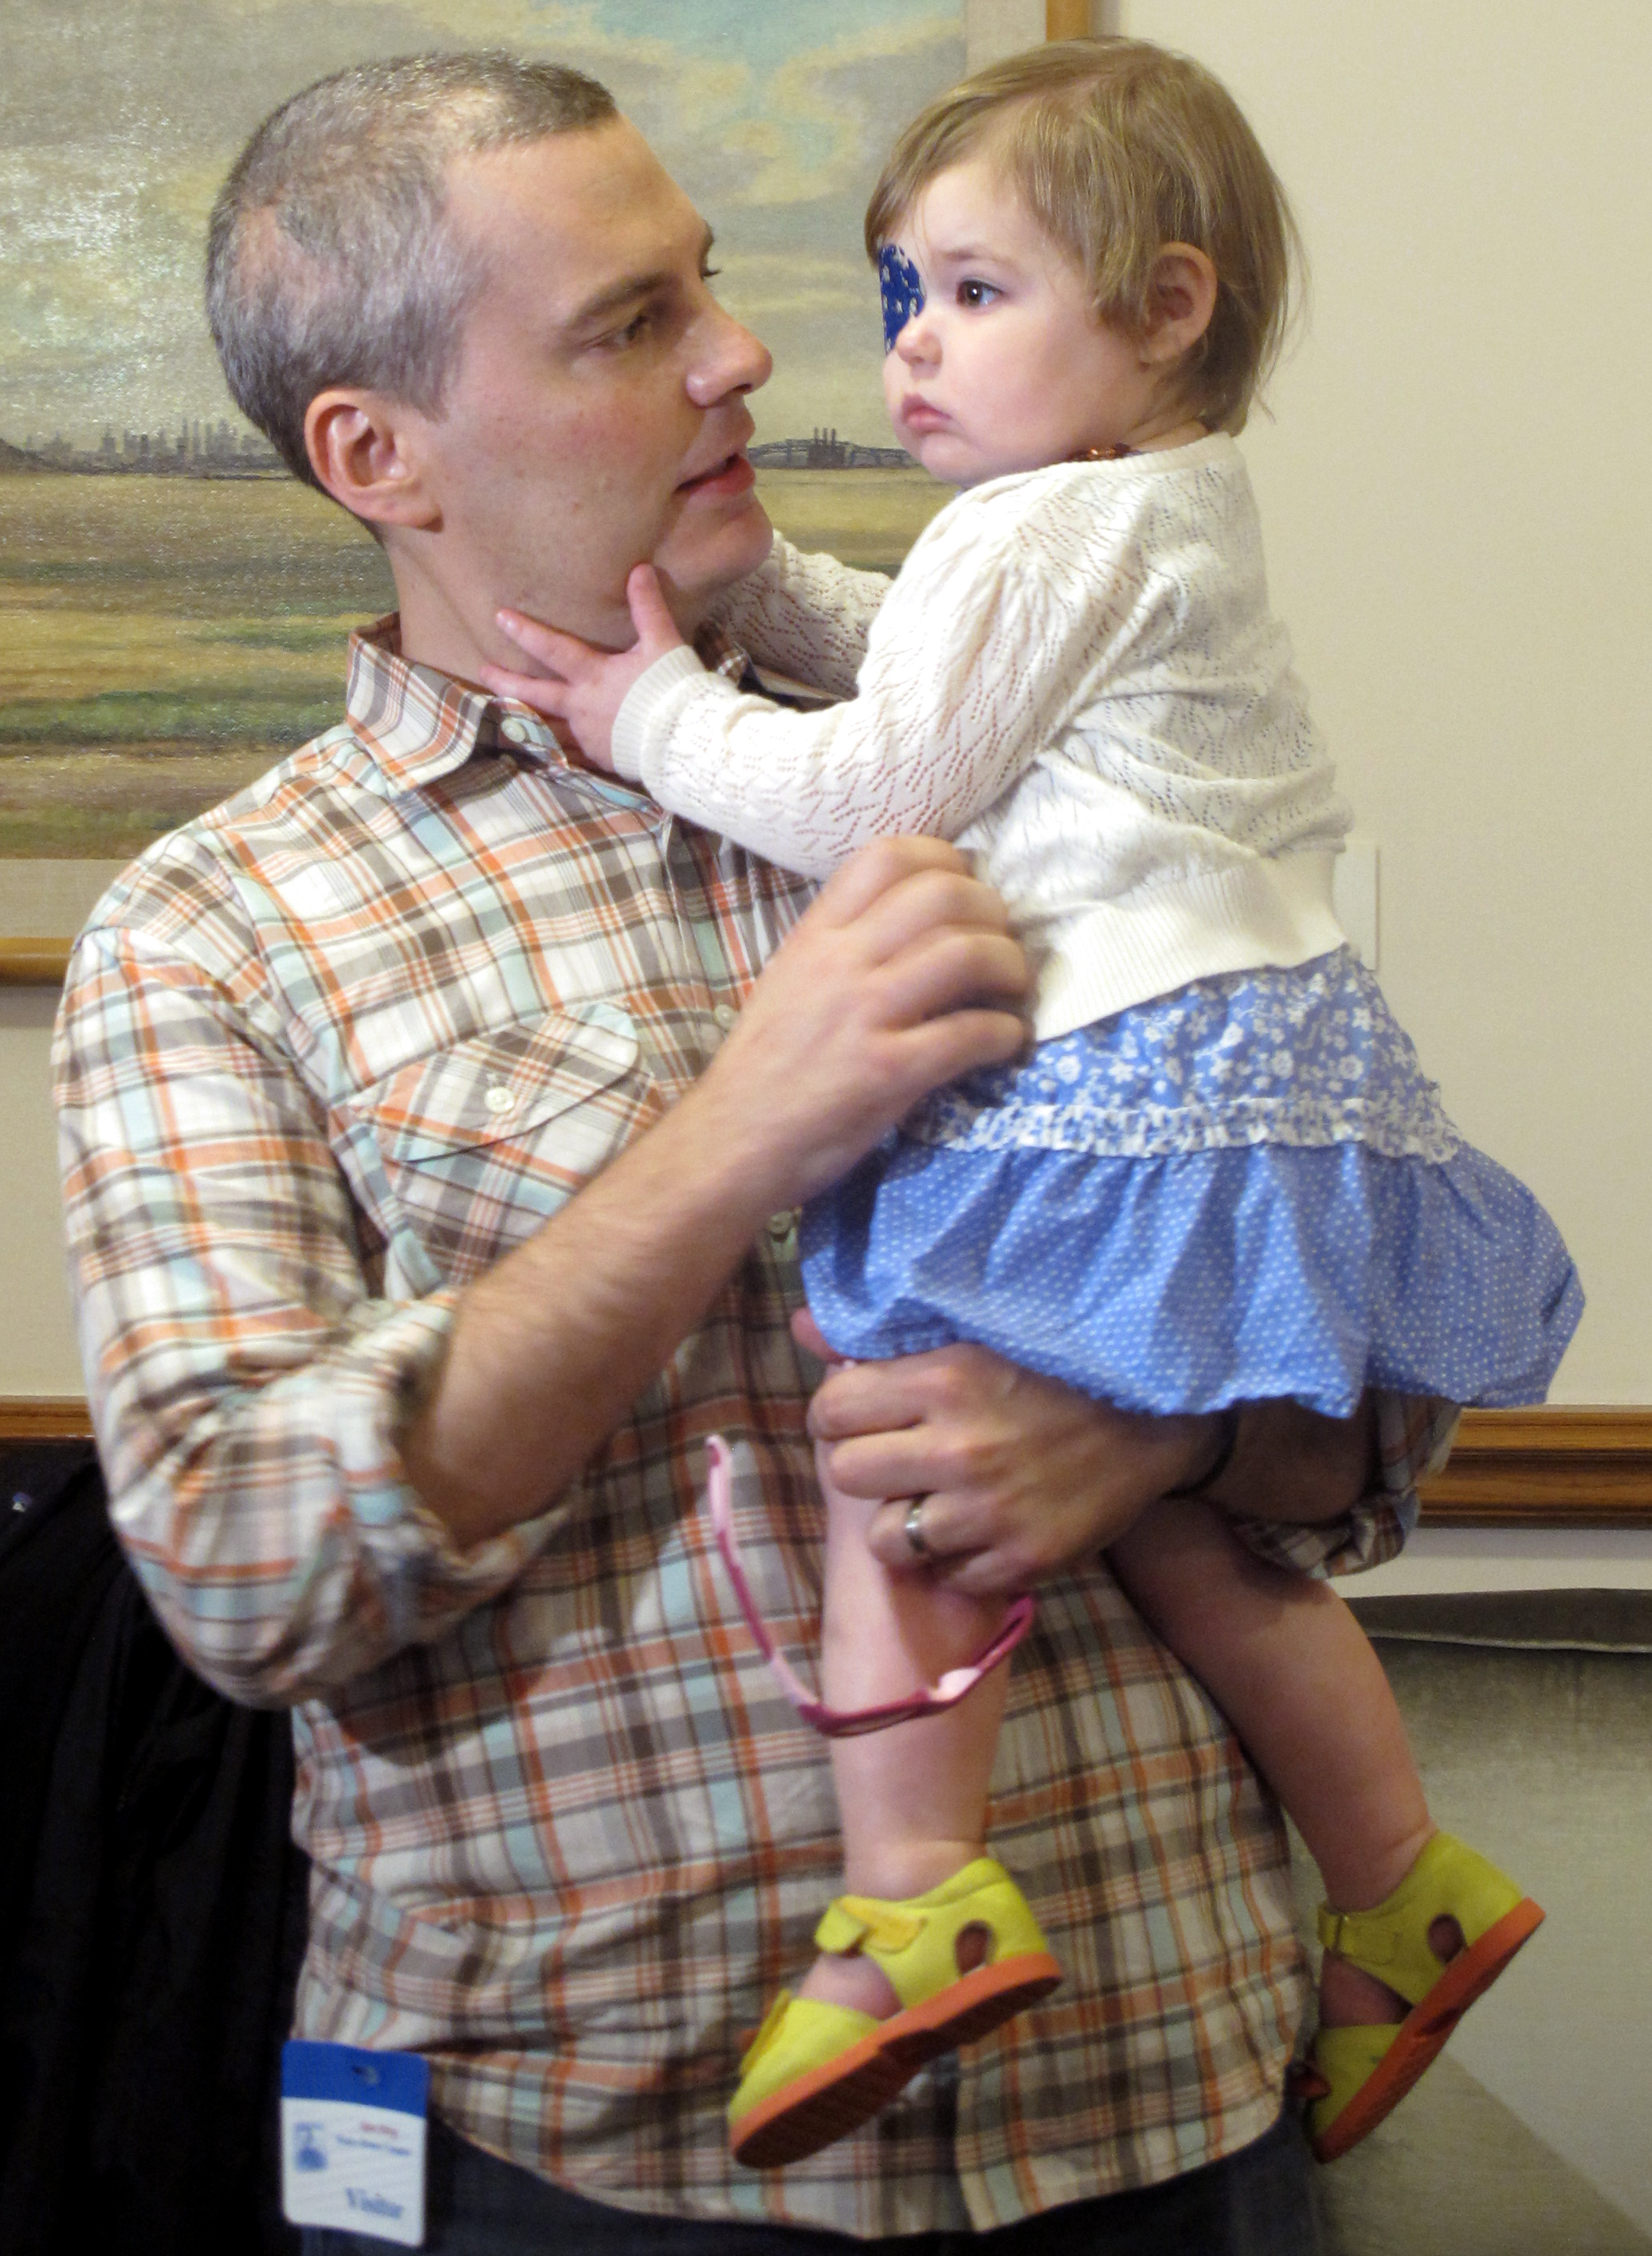 Brian Wilson, of Scotch Plains, N.J. holds his 2-year-old daughter Vivian. (Geoff Mulvihill—AP)